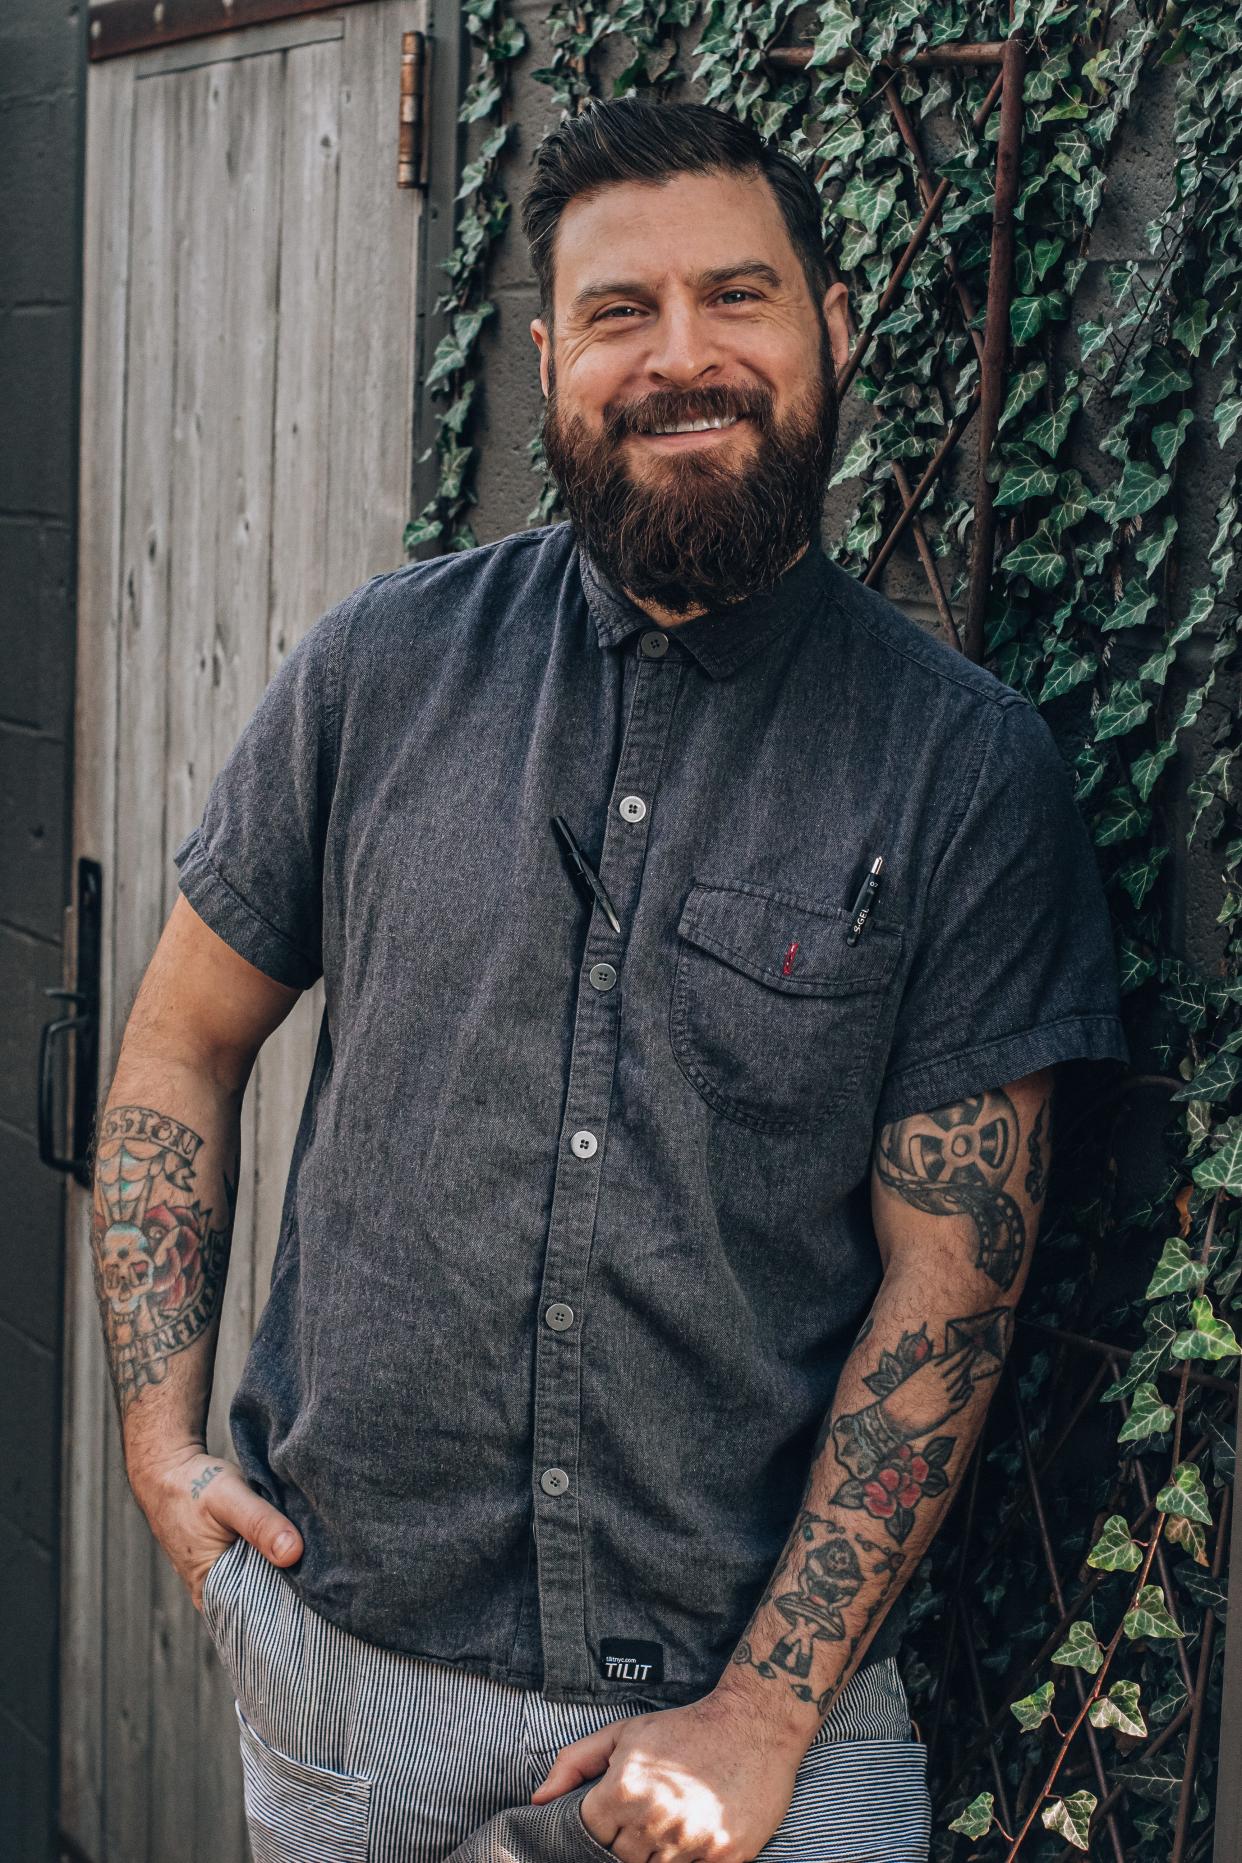 Jason La Iacona serves as the head chef at Miel, a Nashville restaurant owned by Seema Prasad. The chef speaks out about mental health in the restaurant industry in an effort to end the stigma that prevents people from seeking out help.